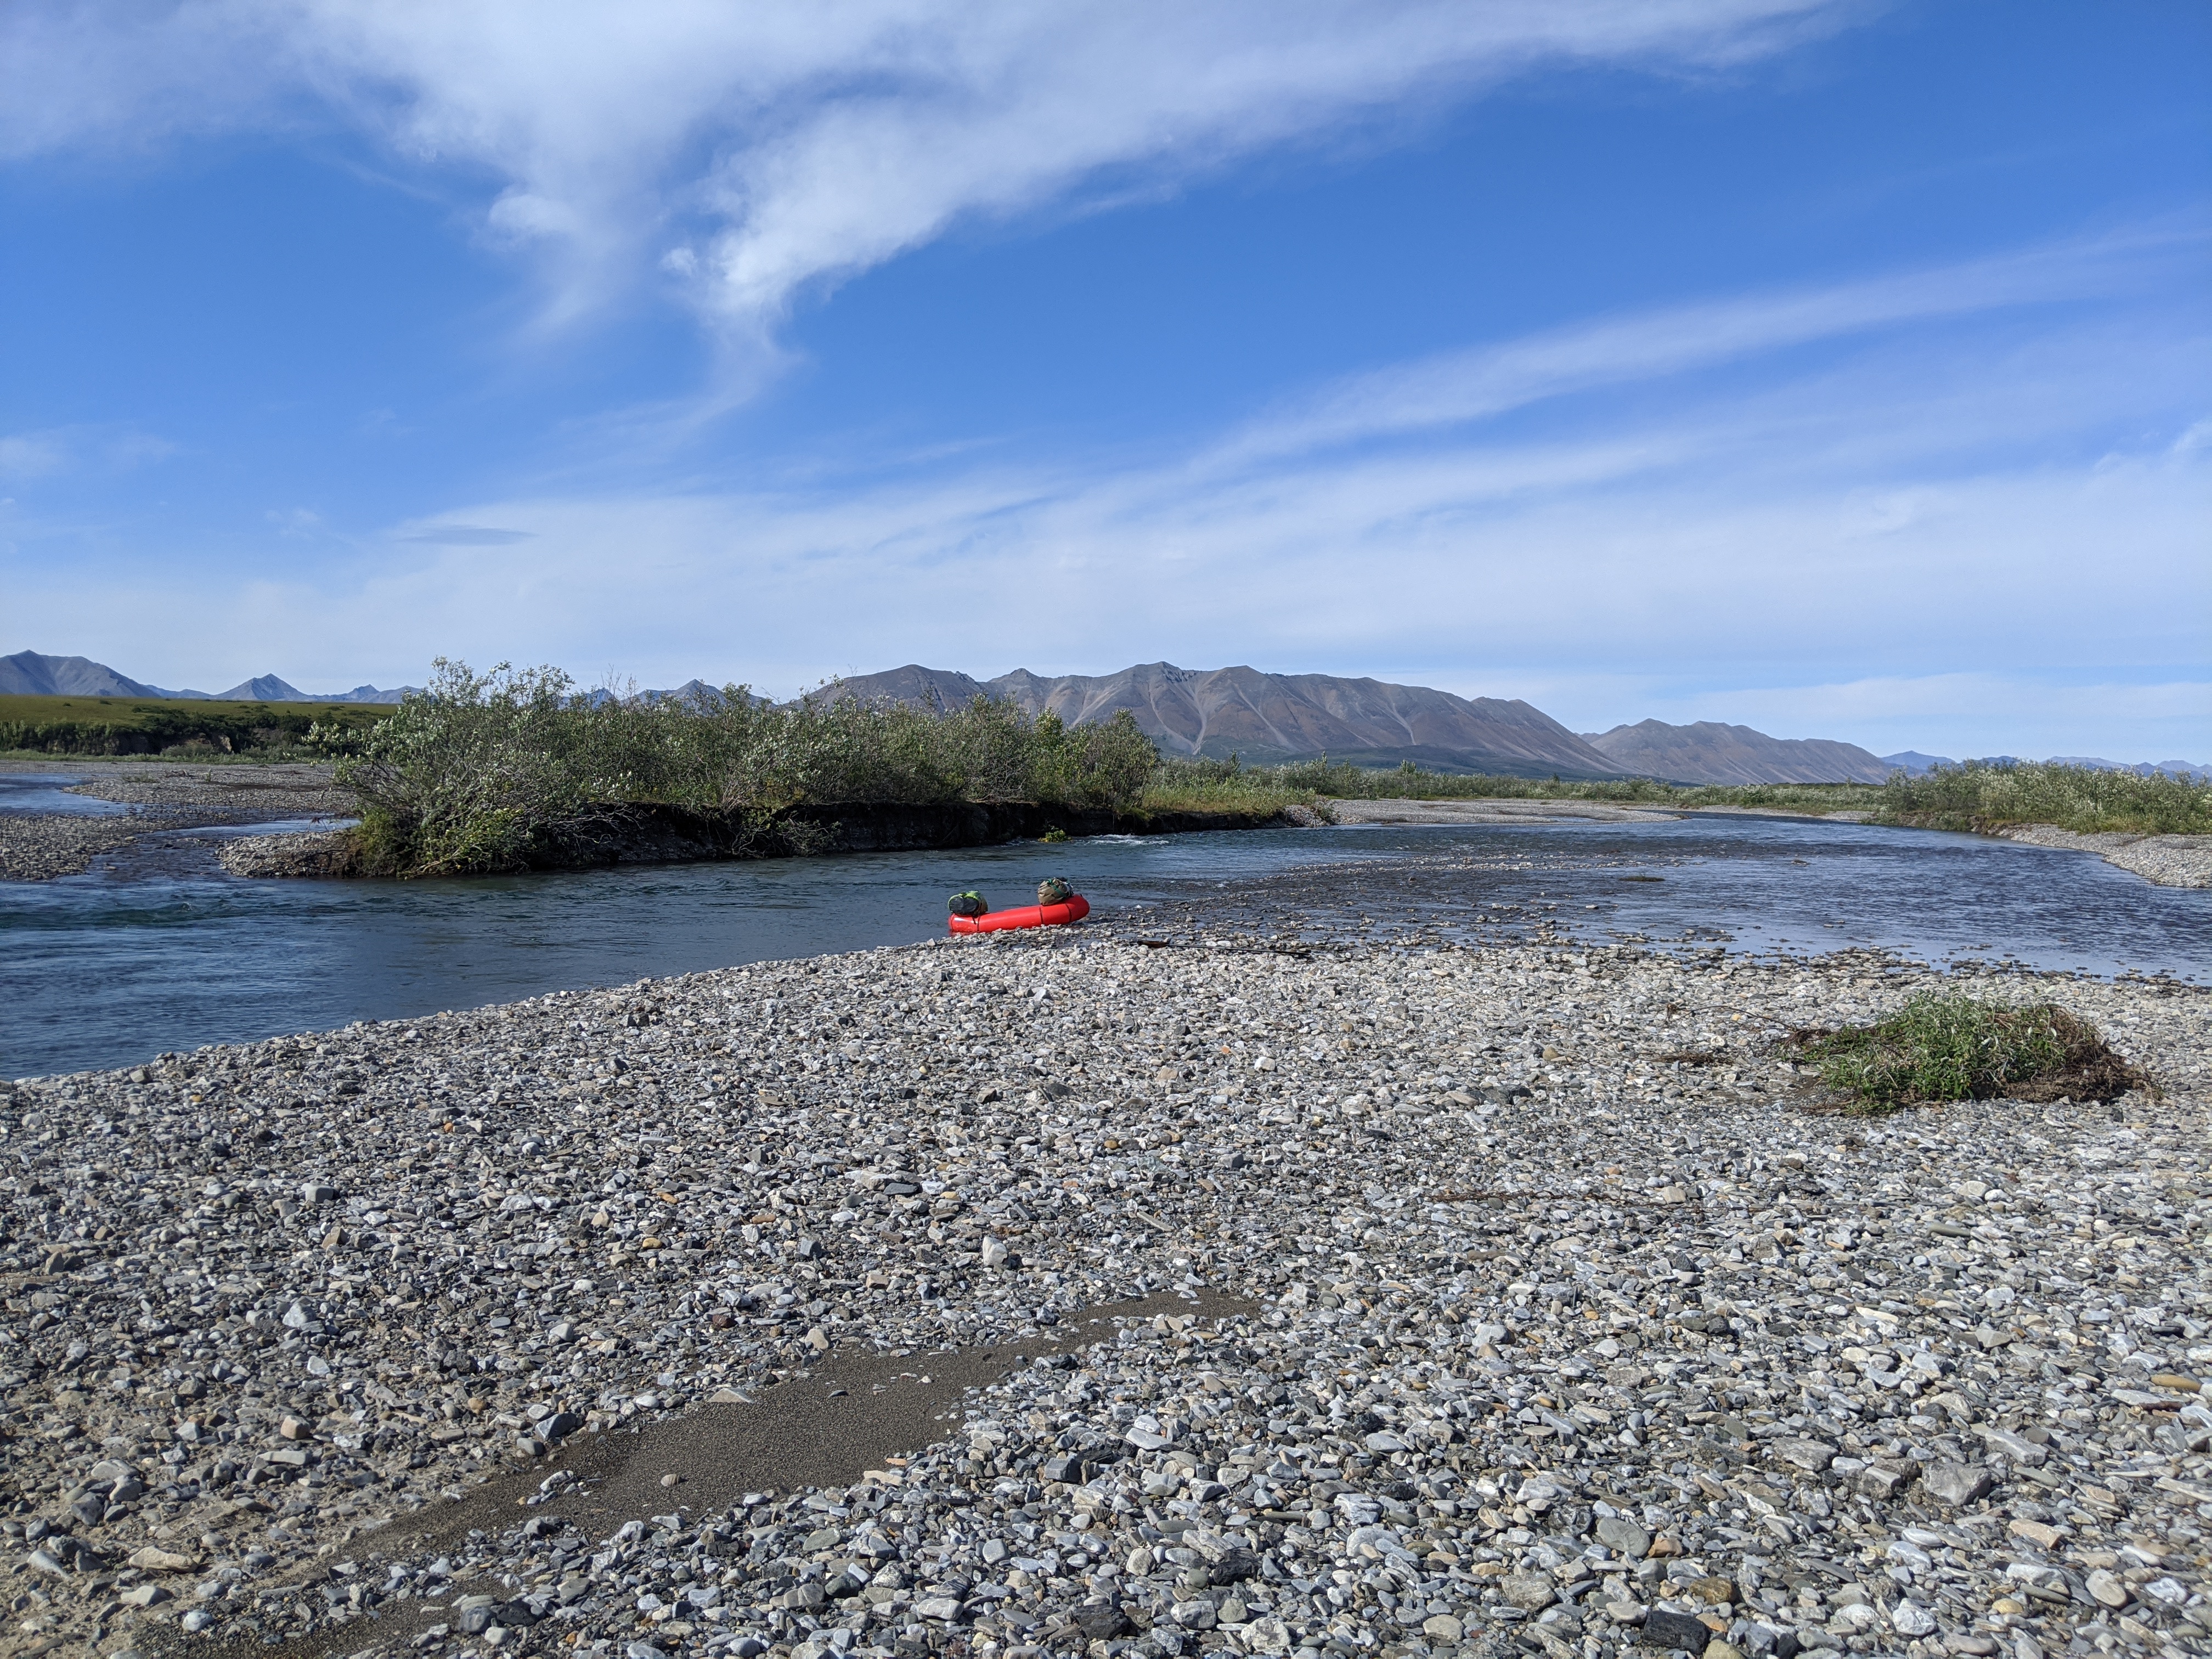 A red raft rests on a gravel bar on the side of a river with a view of mountains, trees, and blue sky with clouds in the background. 